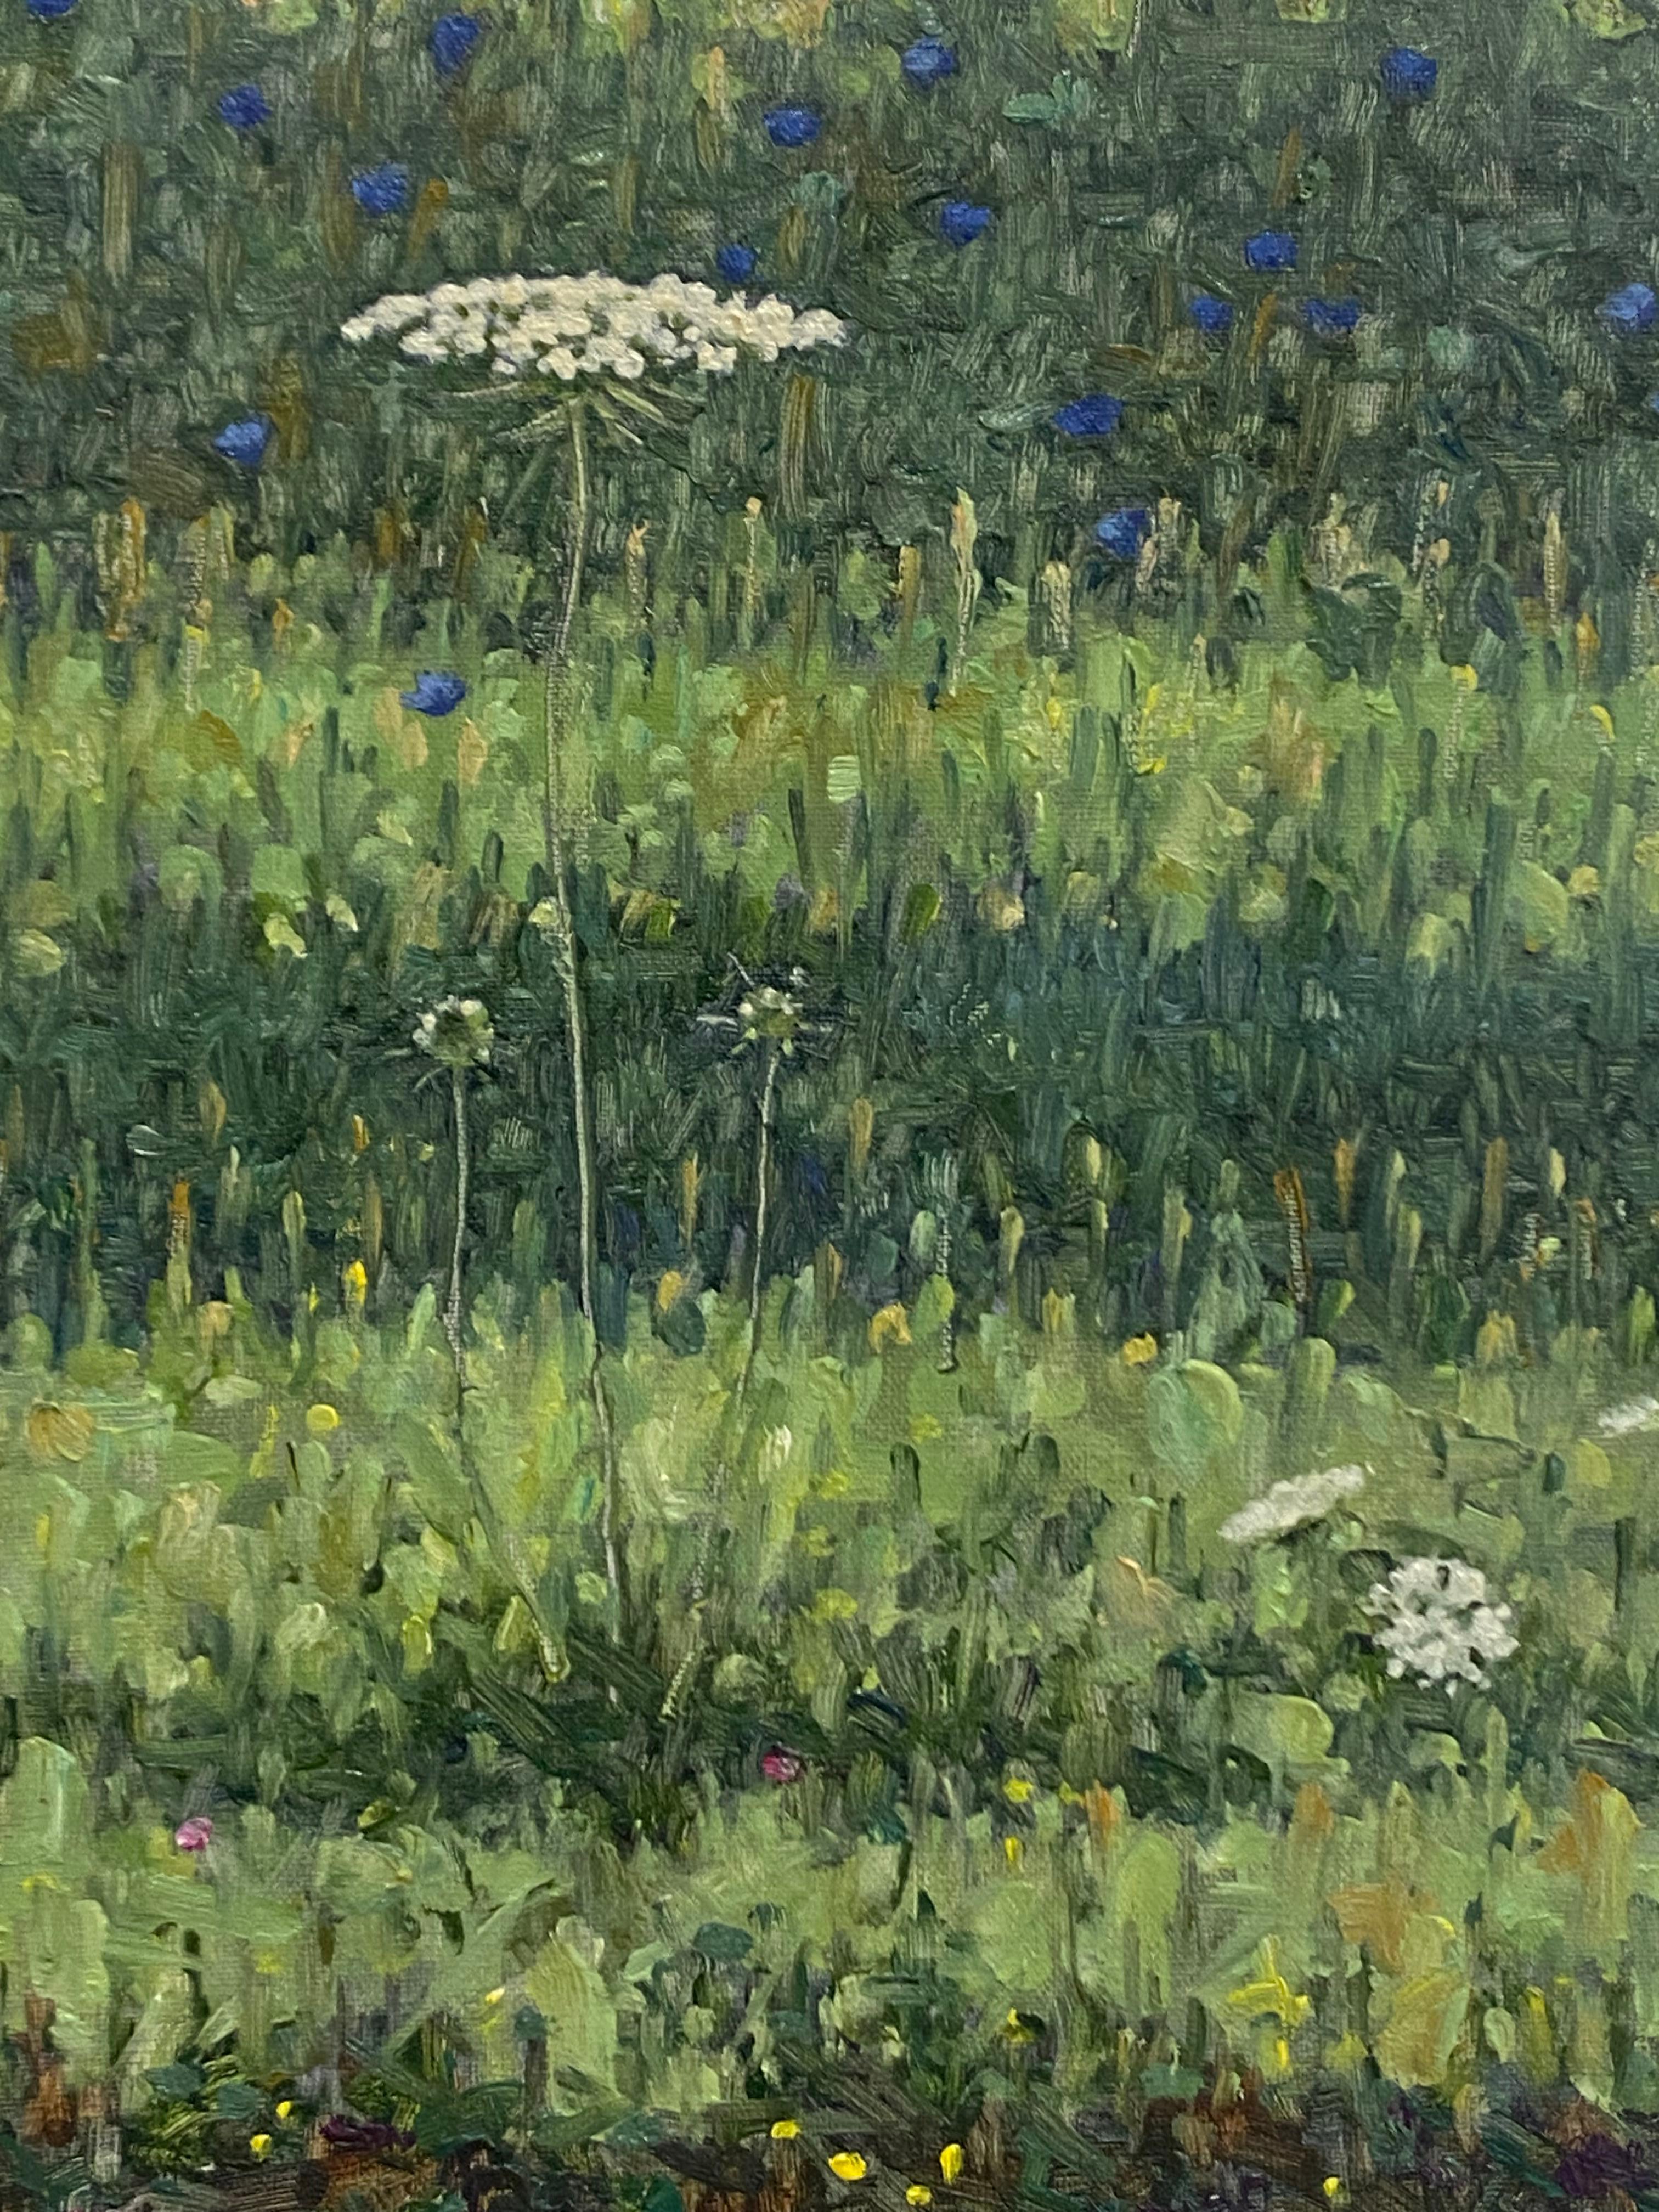 A peaceful outdoor scene of a delicately painted field with yellow, white and pink flowers and Queen Anne's lace, beautifully capturing the idyllic feel of a field of wildflowers and tall grass in early August. Signed, dated and titled on